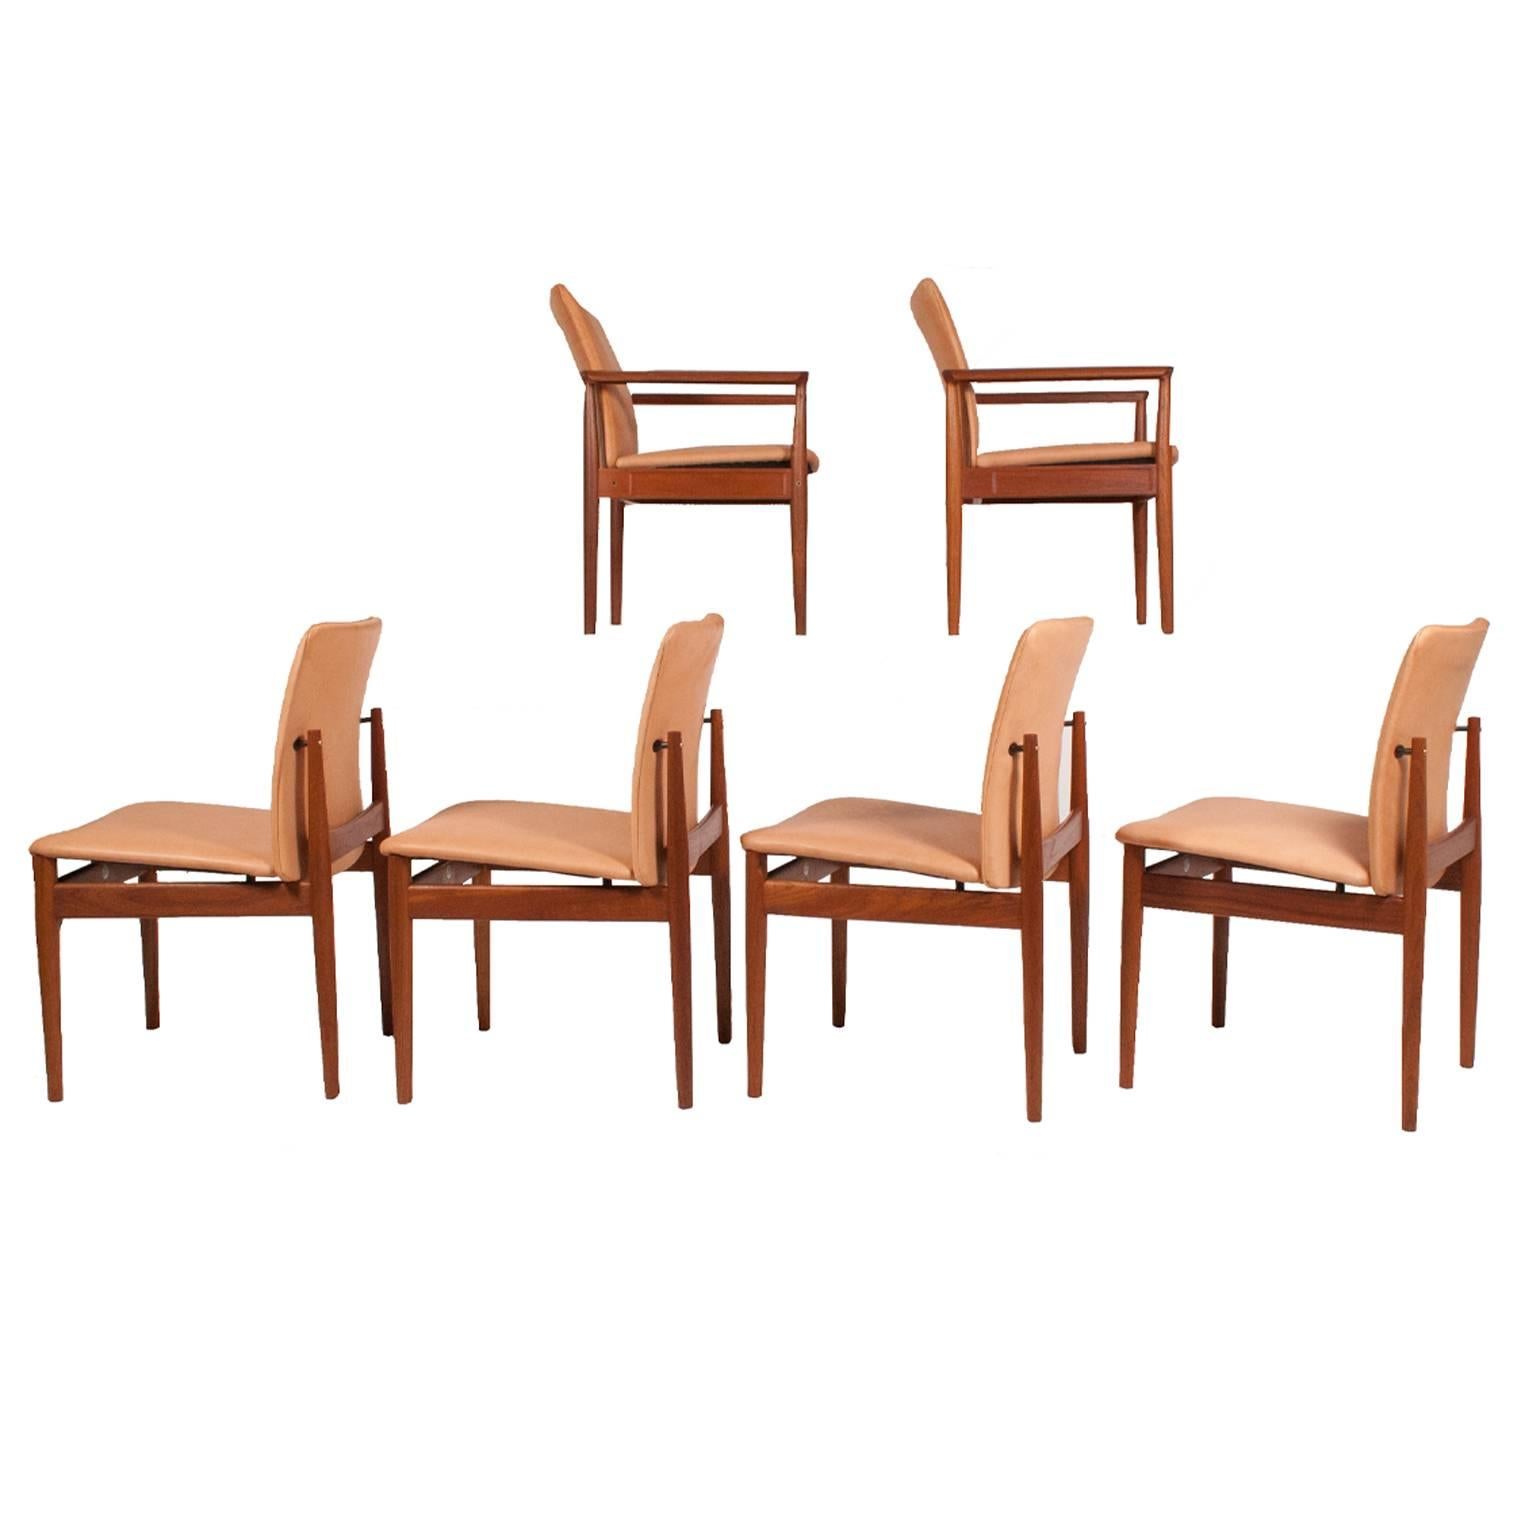 Two armchairs no. 209, one early production, one later production and four side chairs, no. 191, solid teak and natural leather. Side chairs have brass spacers to the back. Made by France and son, armchairs size 32